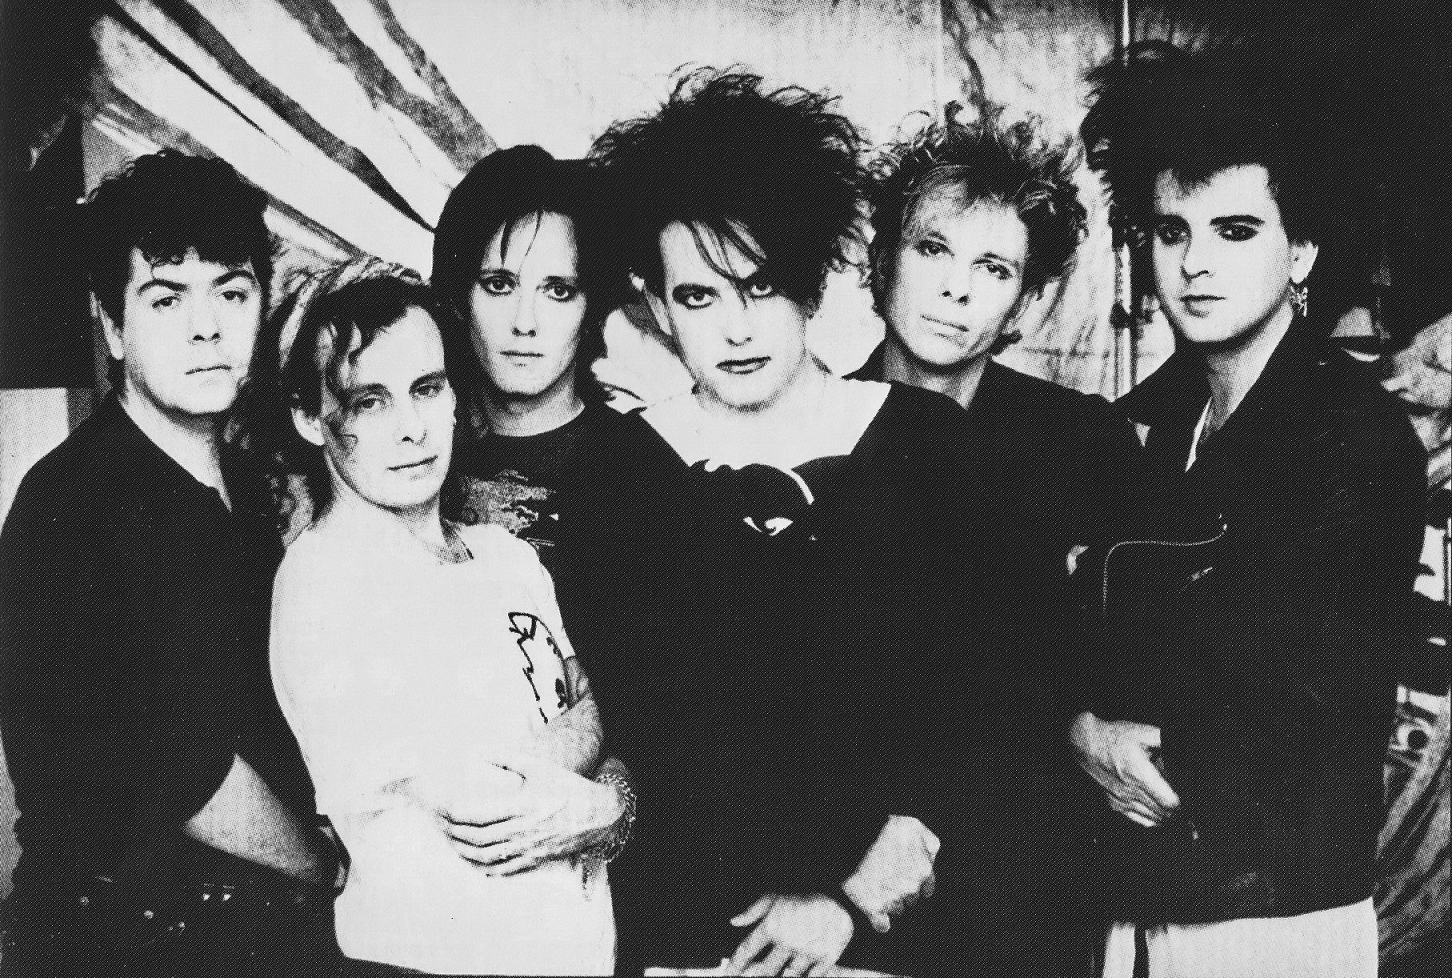 The Cure in the 80s